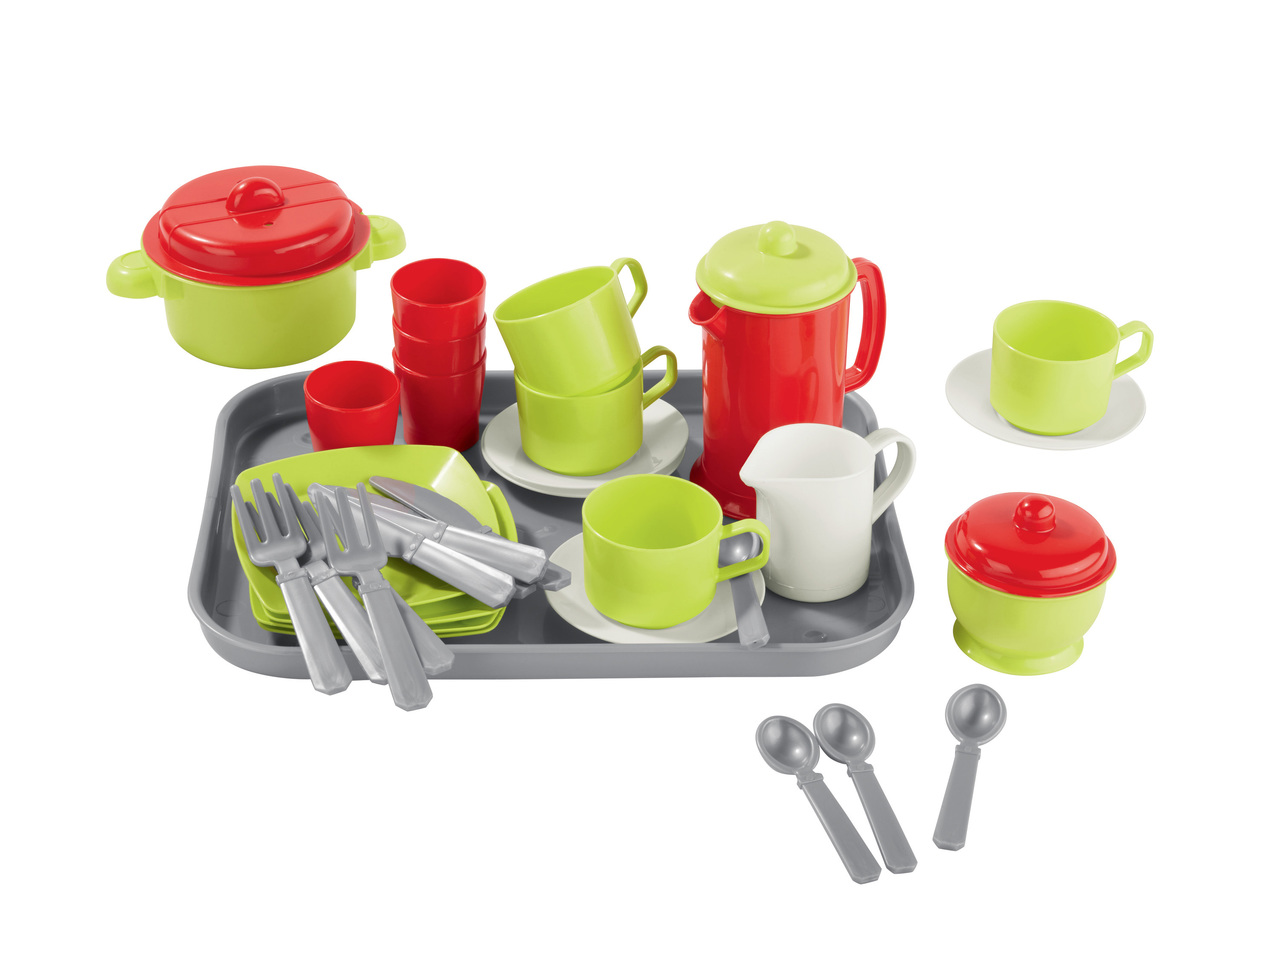 ECOIFFIER Plastic Food / Cutlery Sets